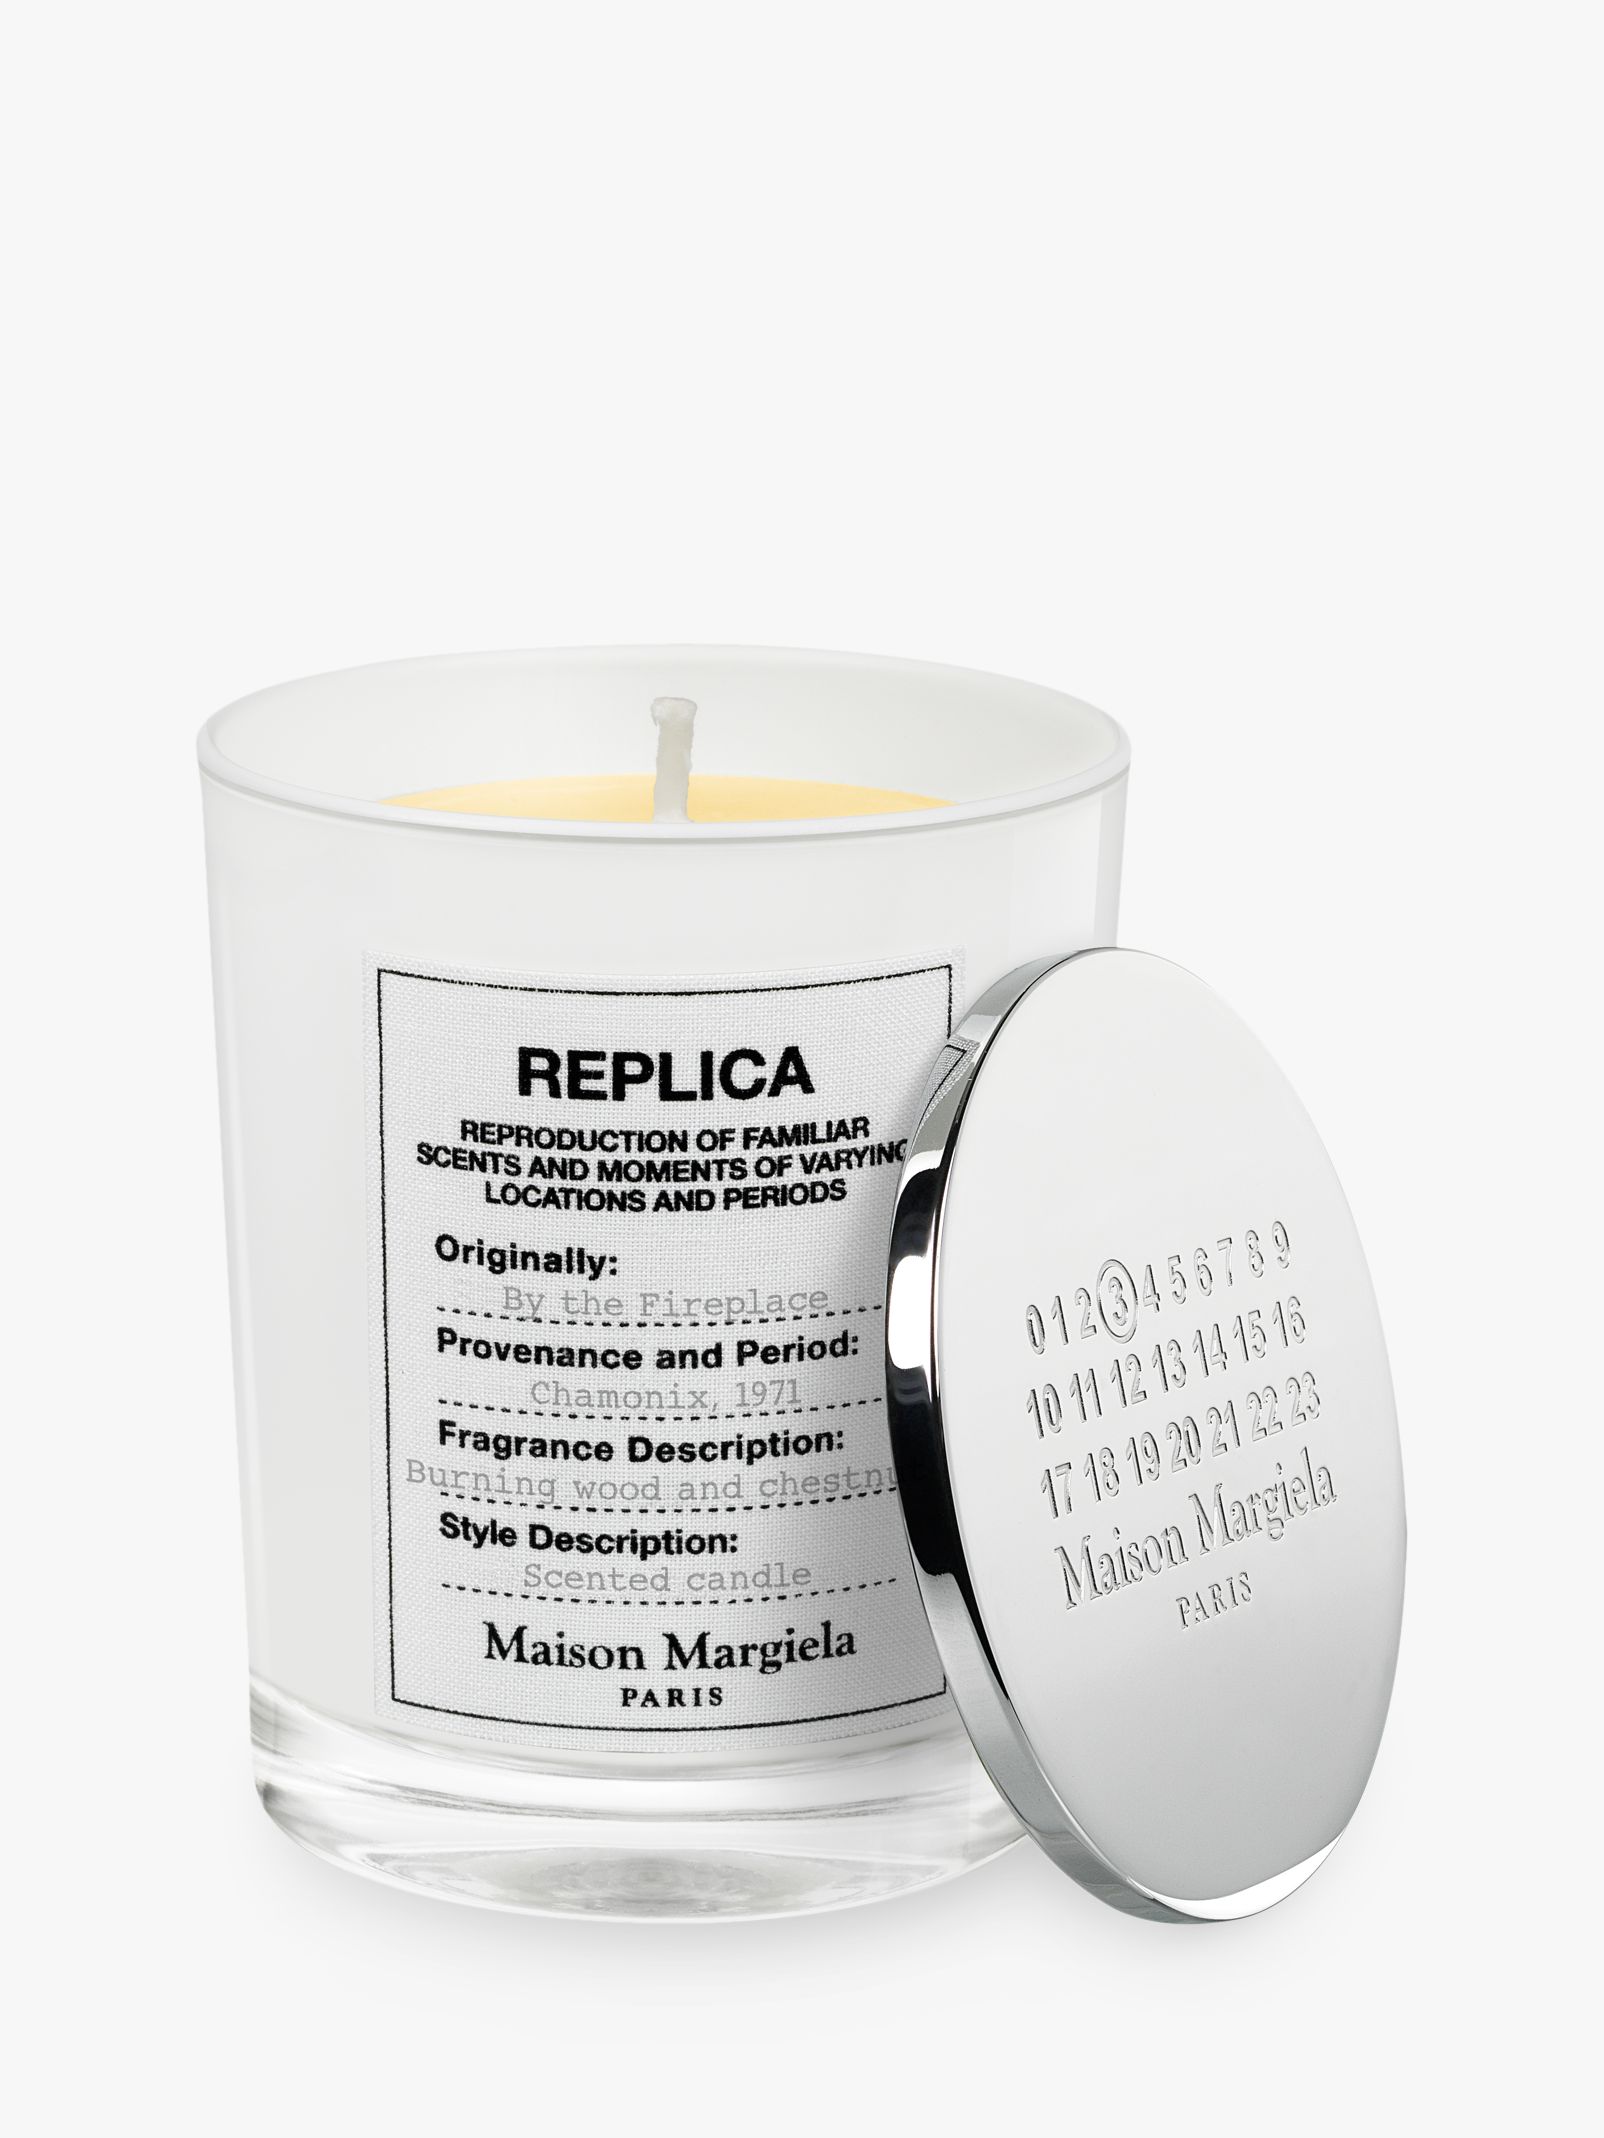 Maison Margiela Replica By The Fireplace Candle, 185g at John Lewis ...